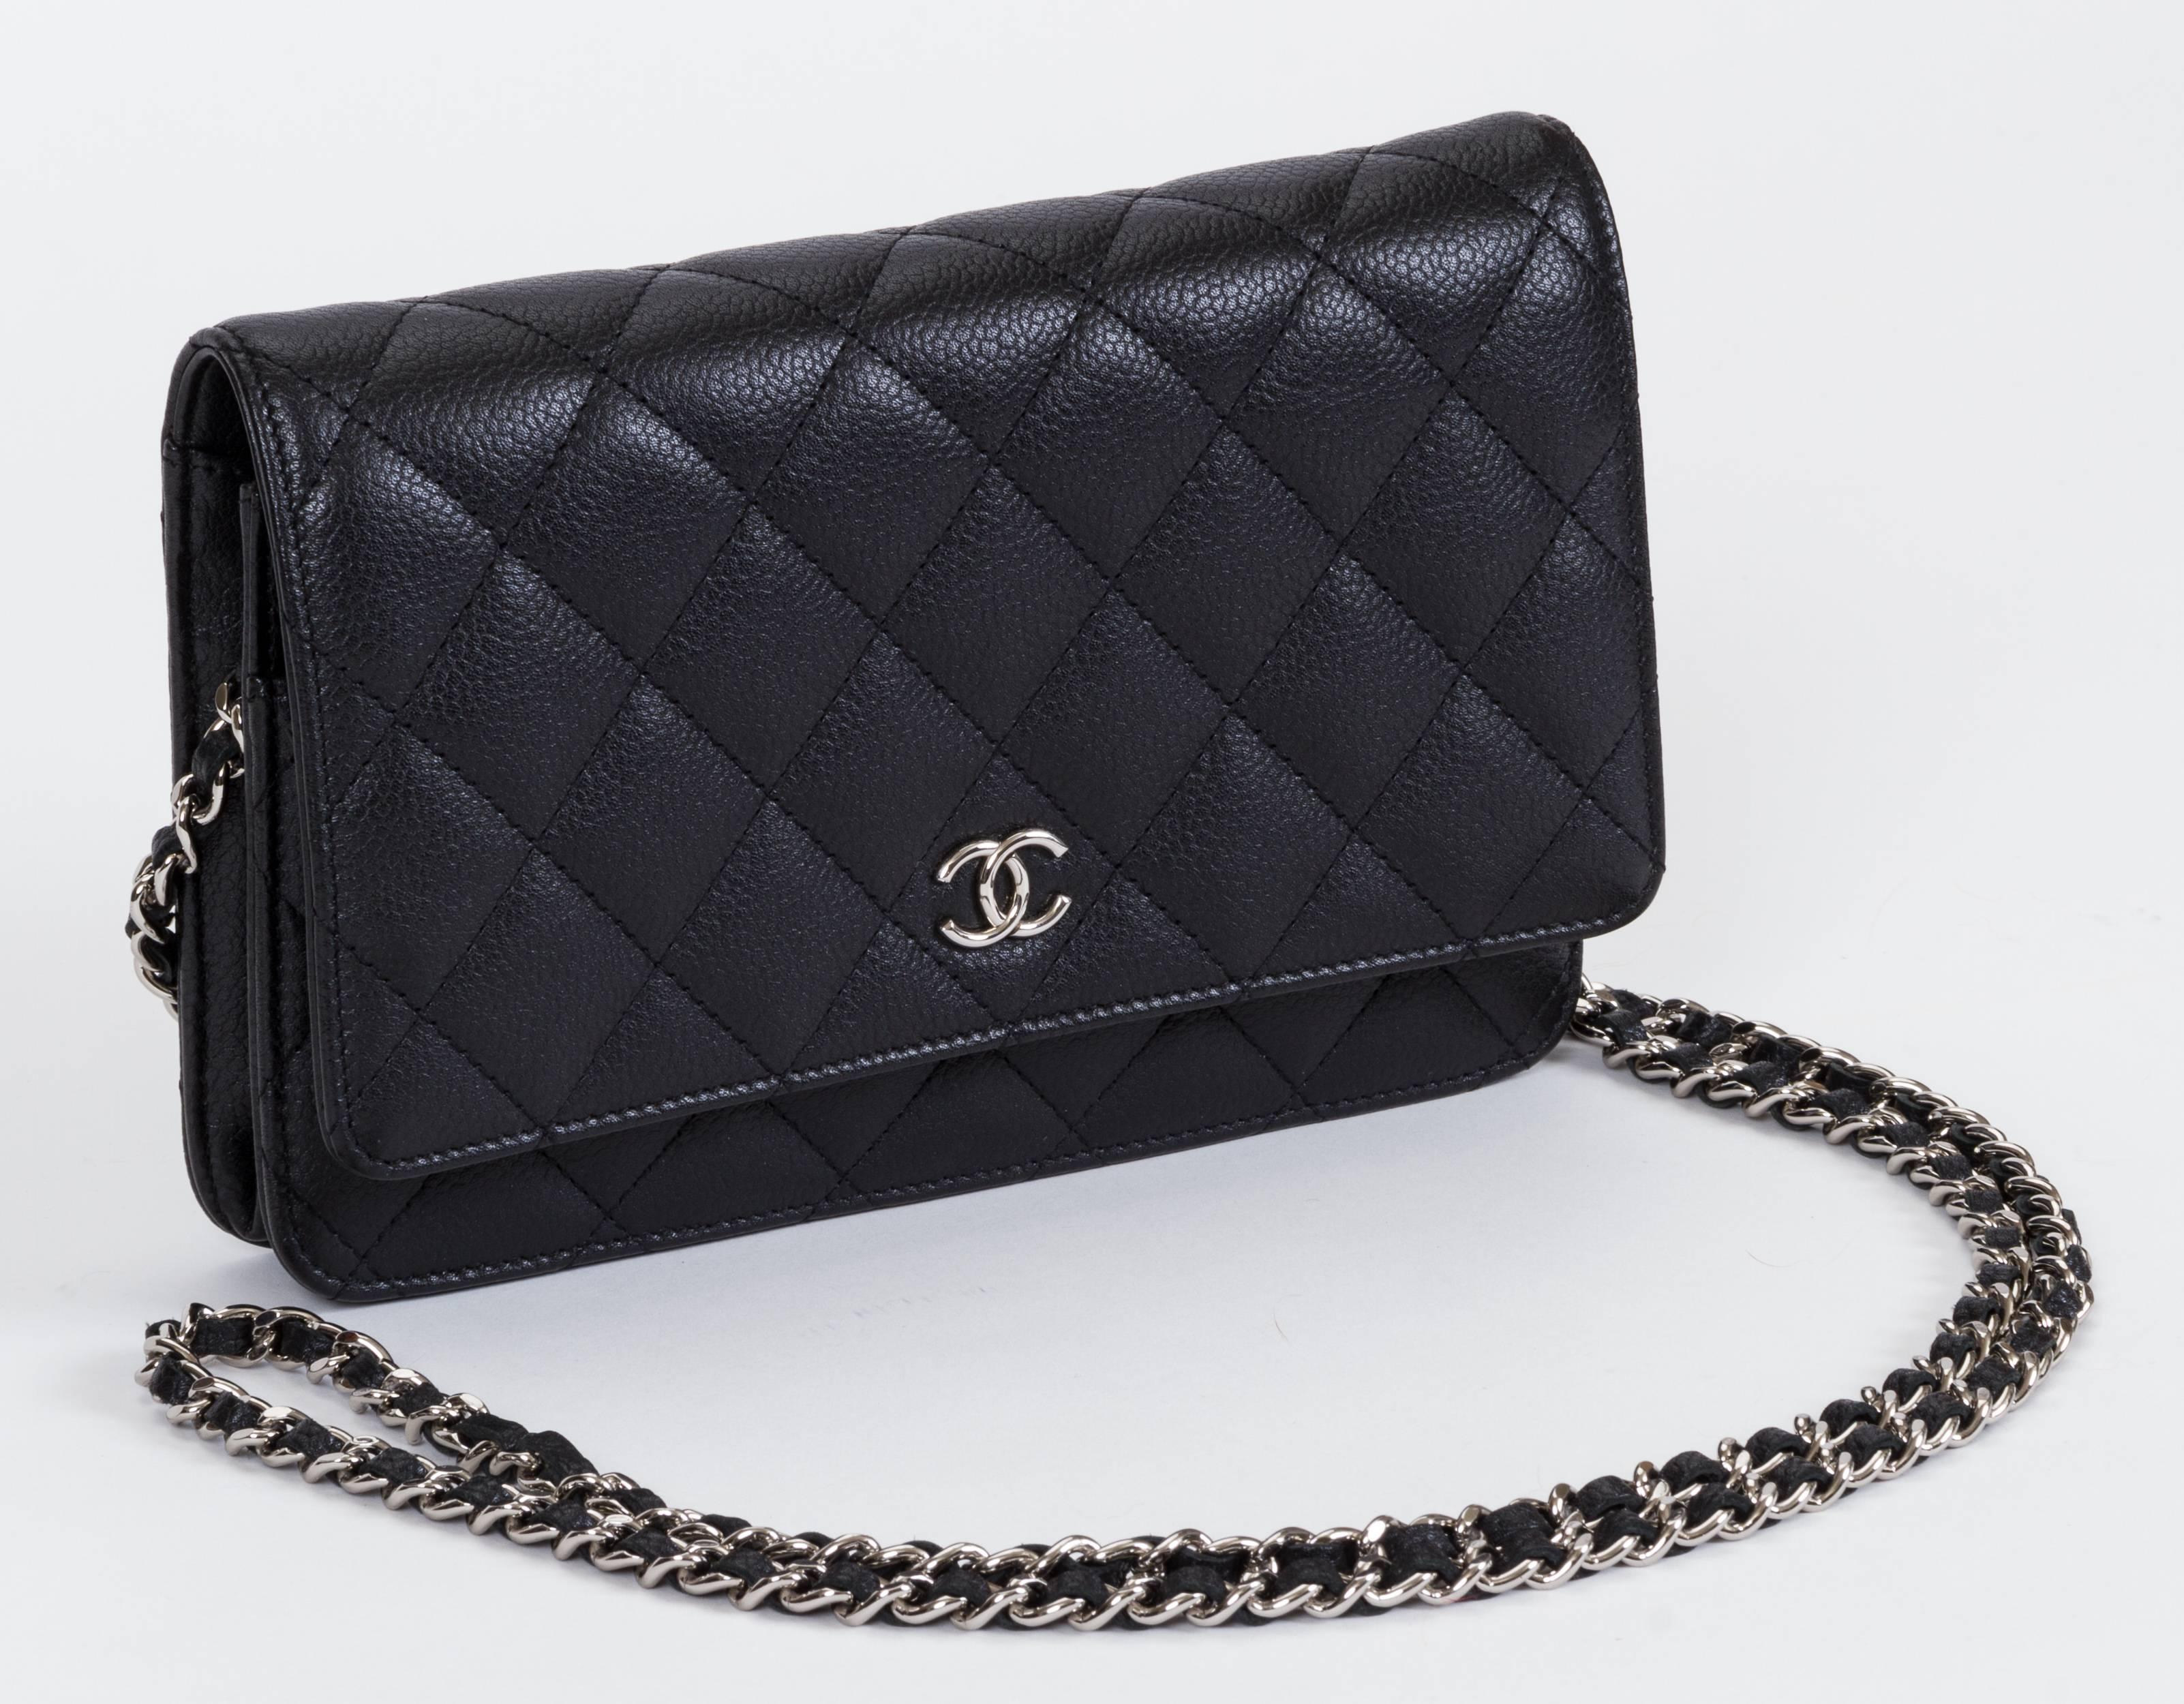 Chanel black caviar quilted wallet on a chain with silver tone hardware. Can be worn as a clutch or as a cross body. New in box. Measurements 7.5